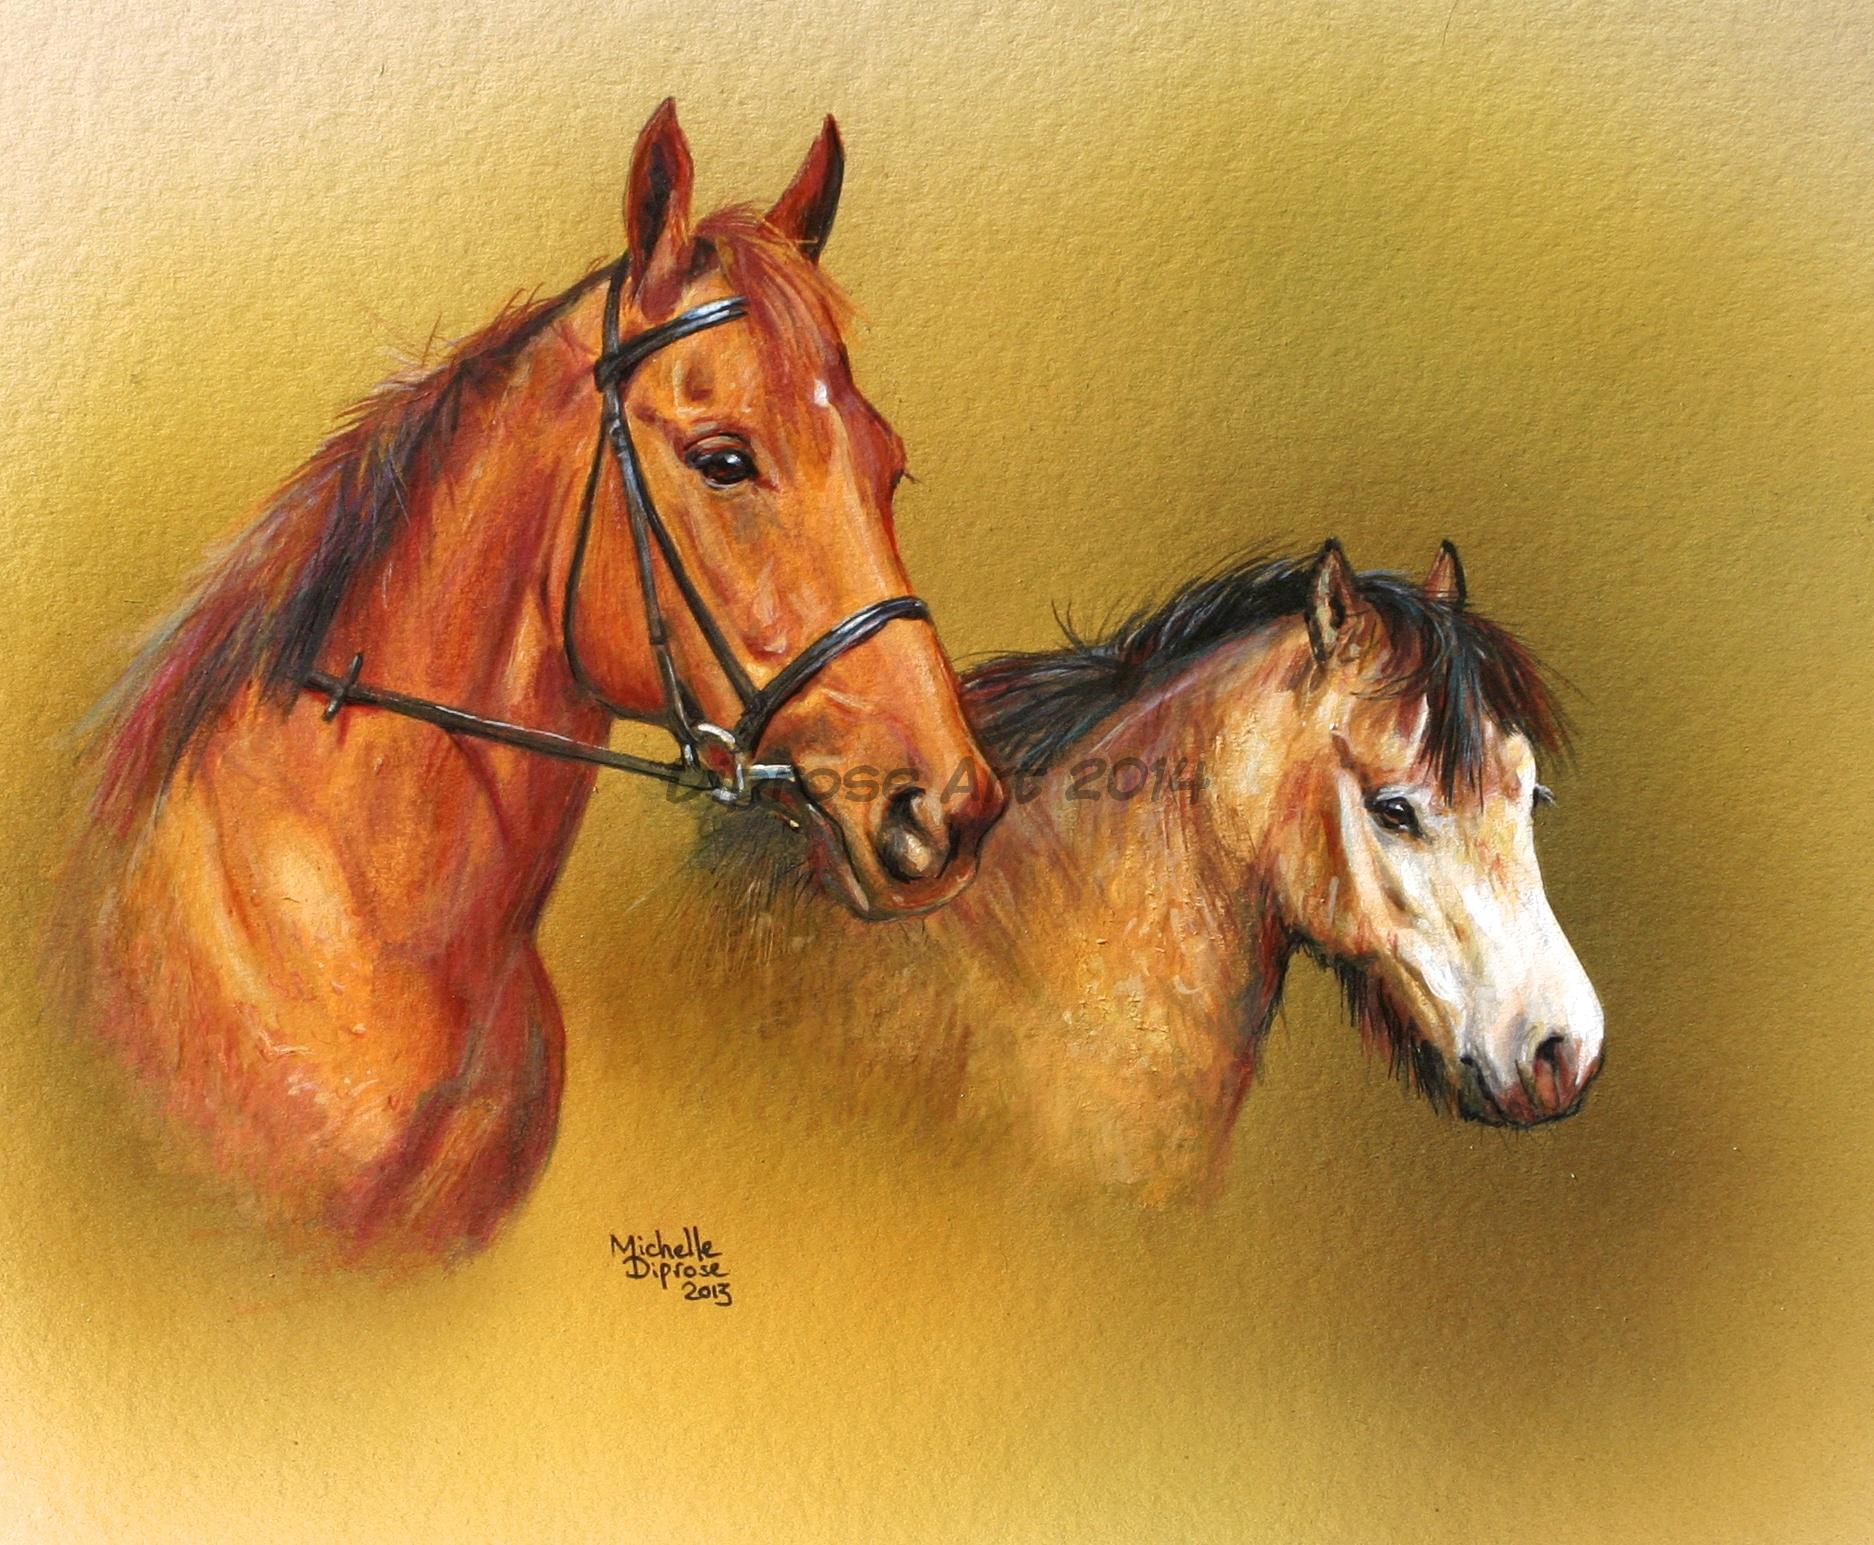 Acrylics on board - approx A3 - horse portraits - a chestnut TB gelding and a dun pony make quite a contrast to each other but these two pals both have equal amounts of character.